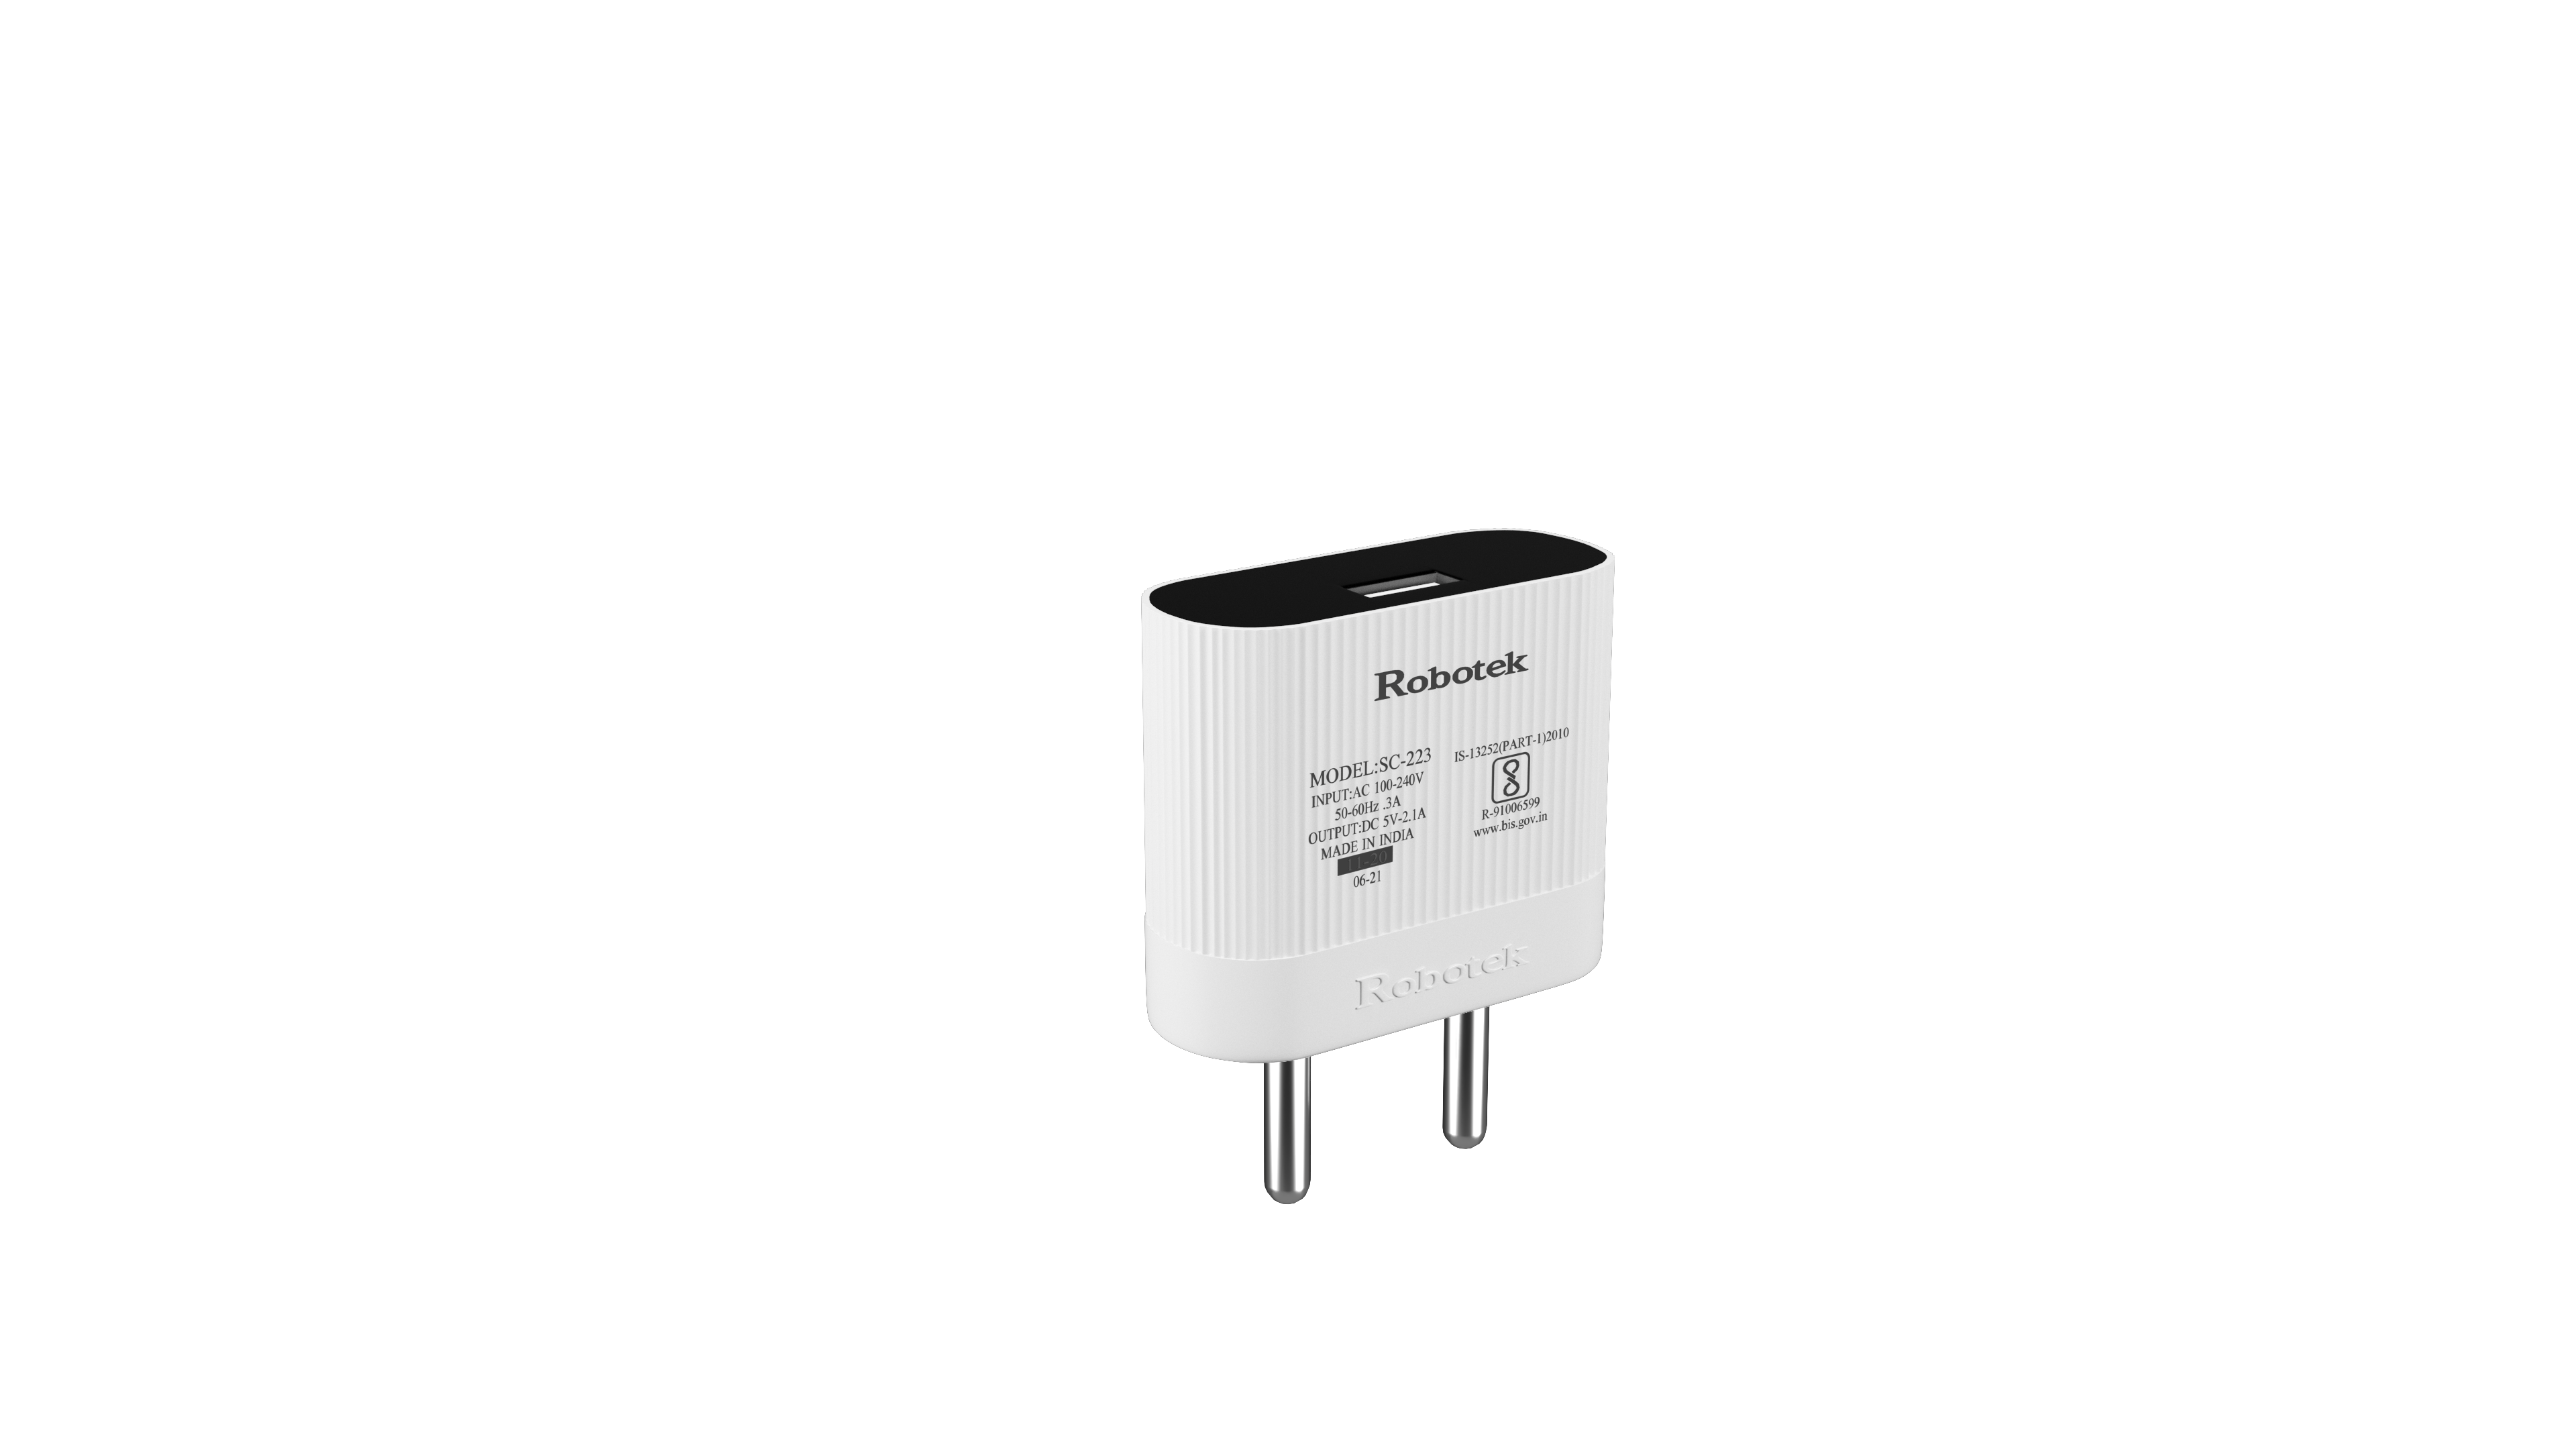 Charger IN AC 100-240V / OUT DC 5V/1A, Mini-USB